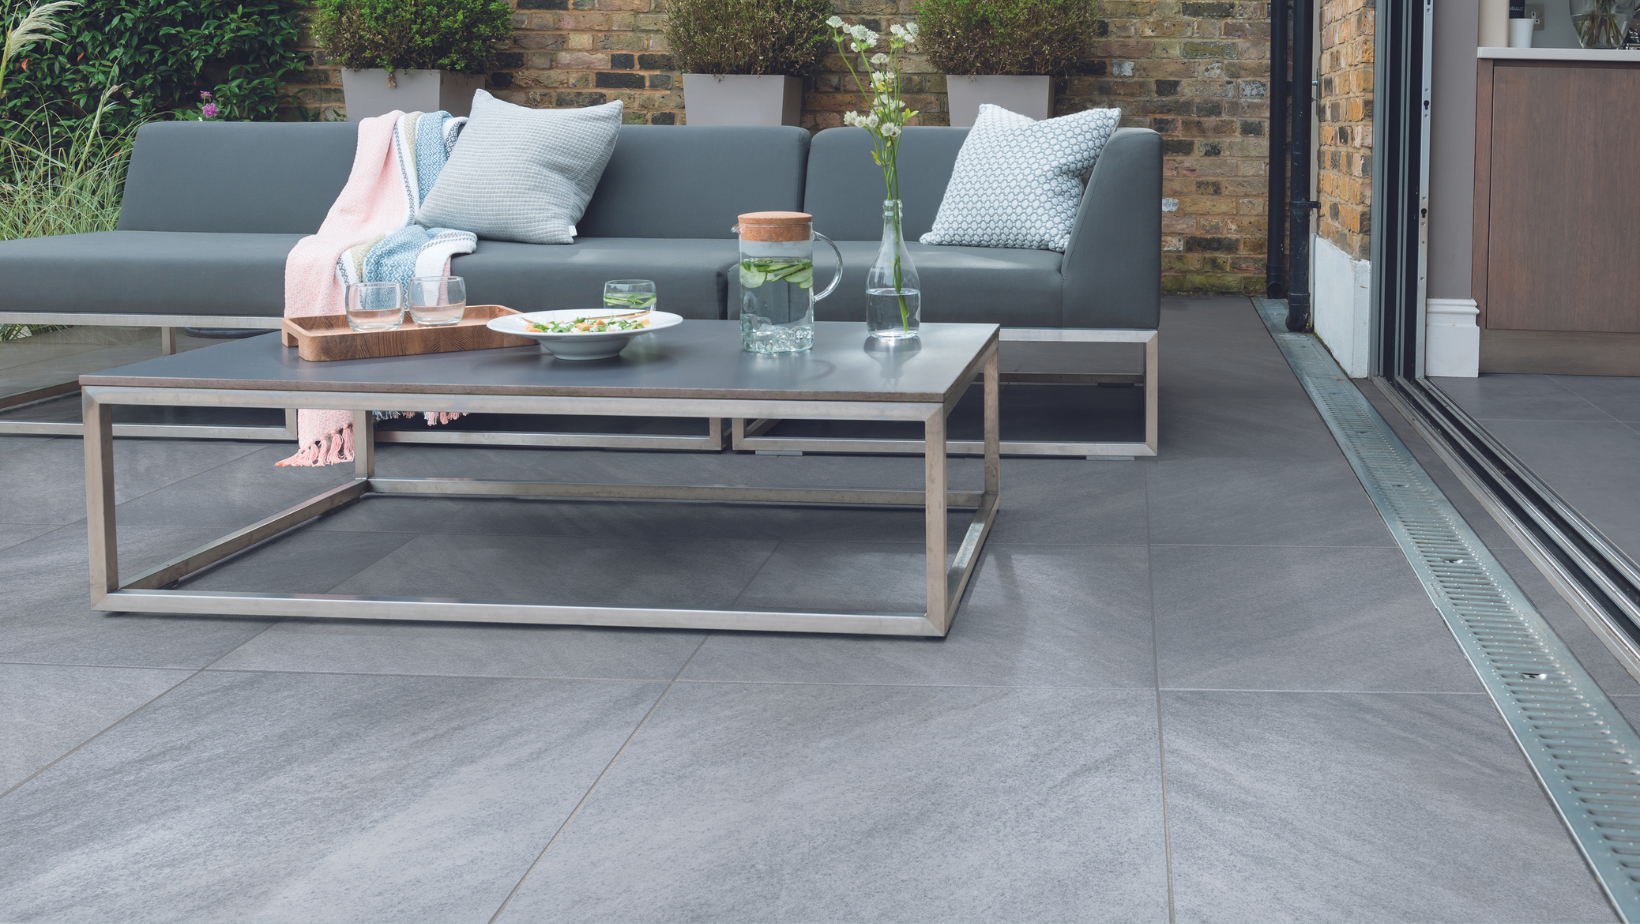 Where Does The Cost Of Patio Paving Go?